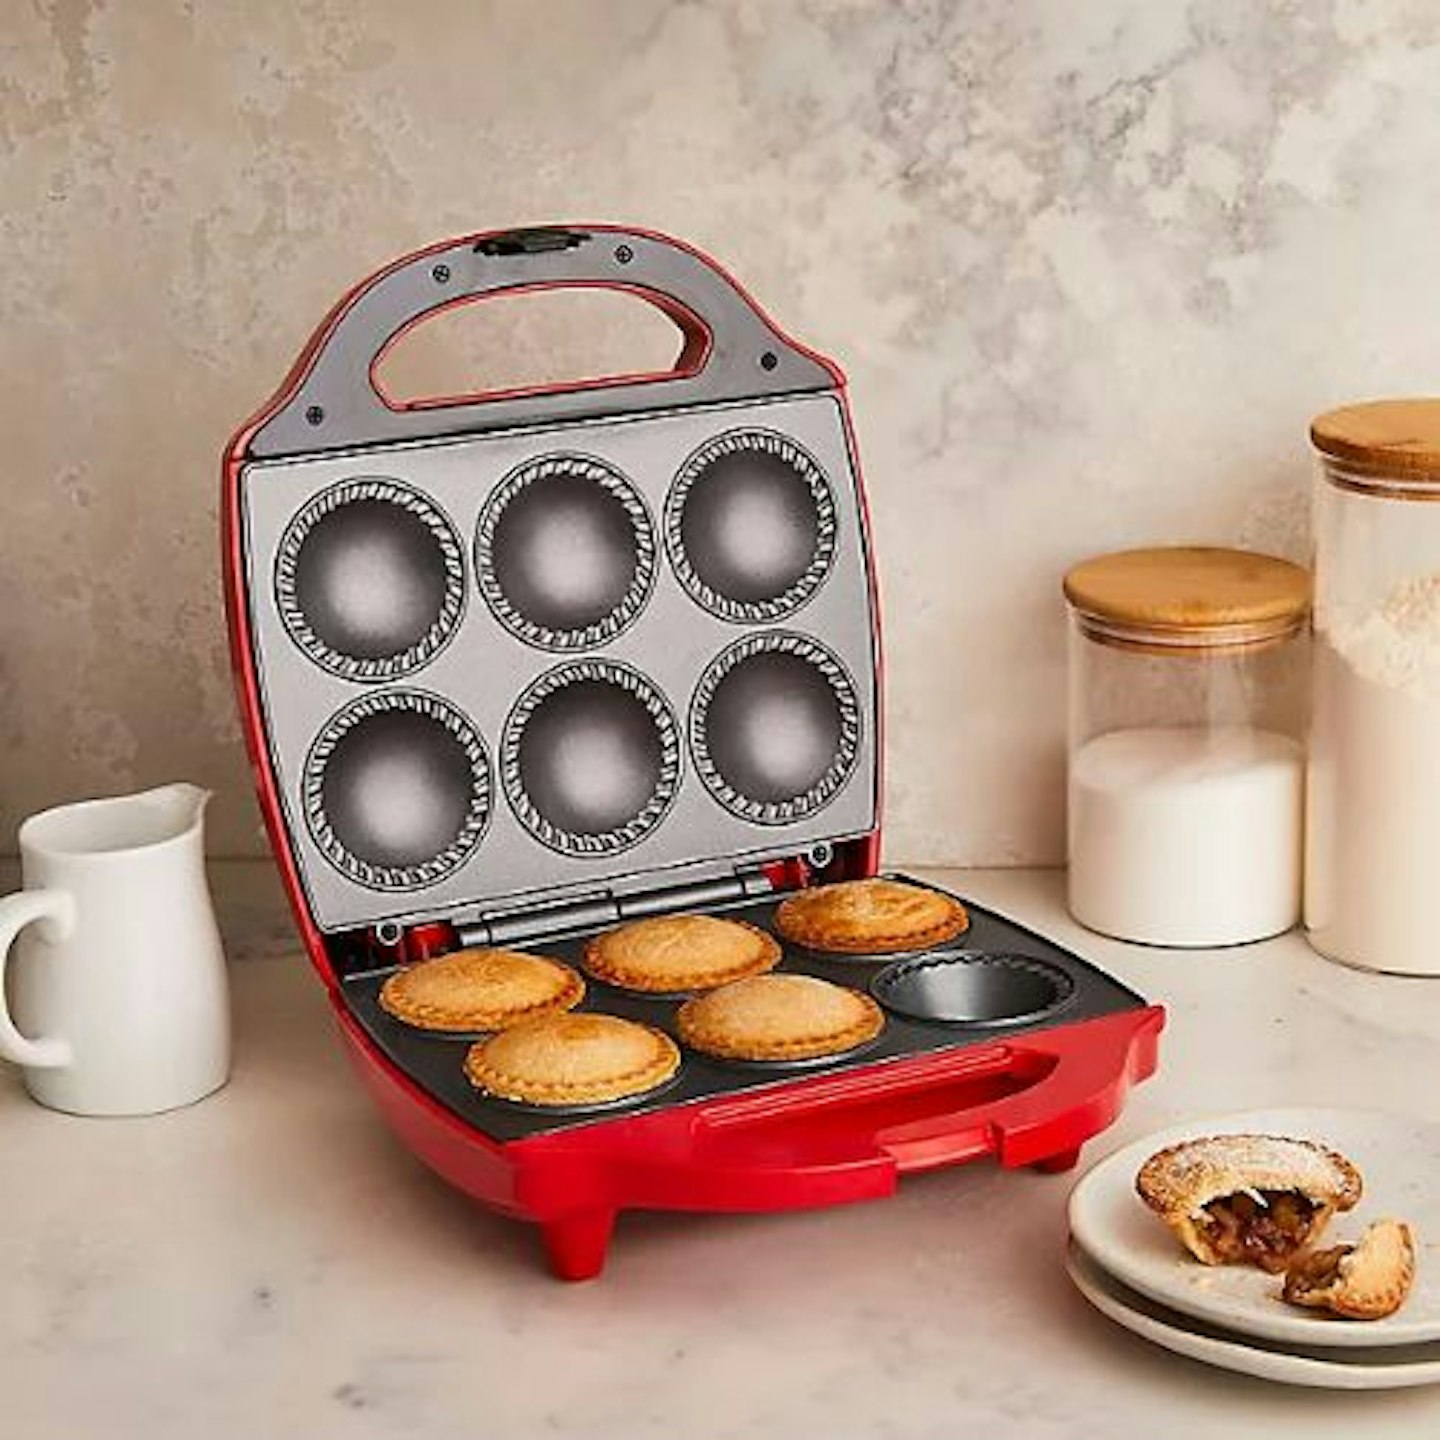 Lakeland Six-Hole Pie Maker in Red